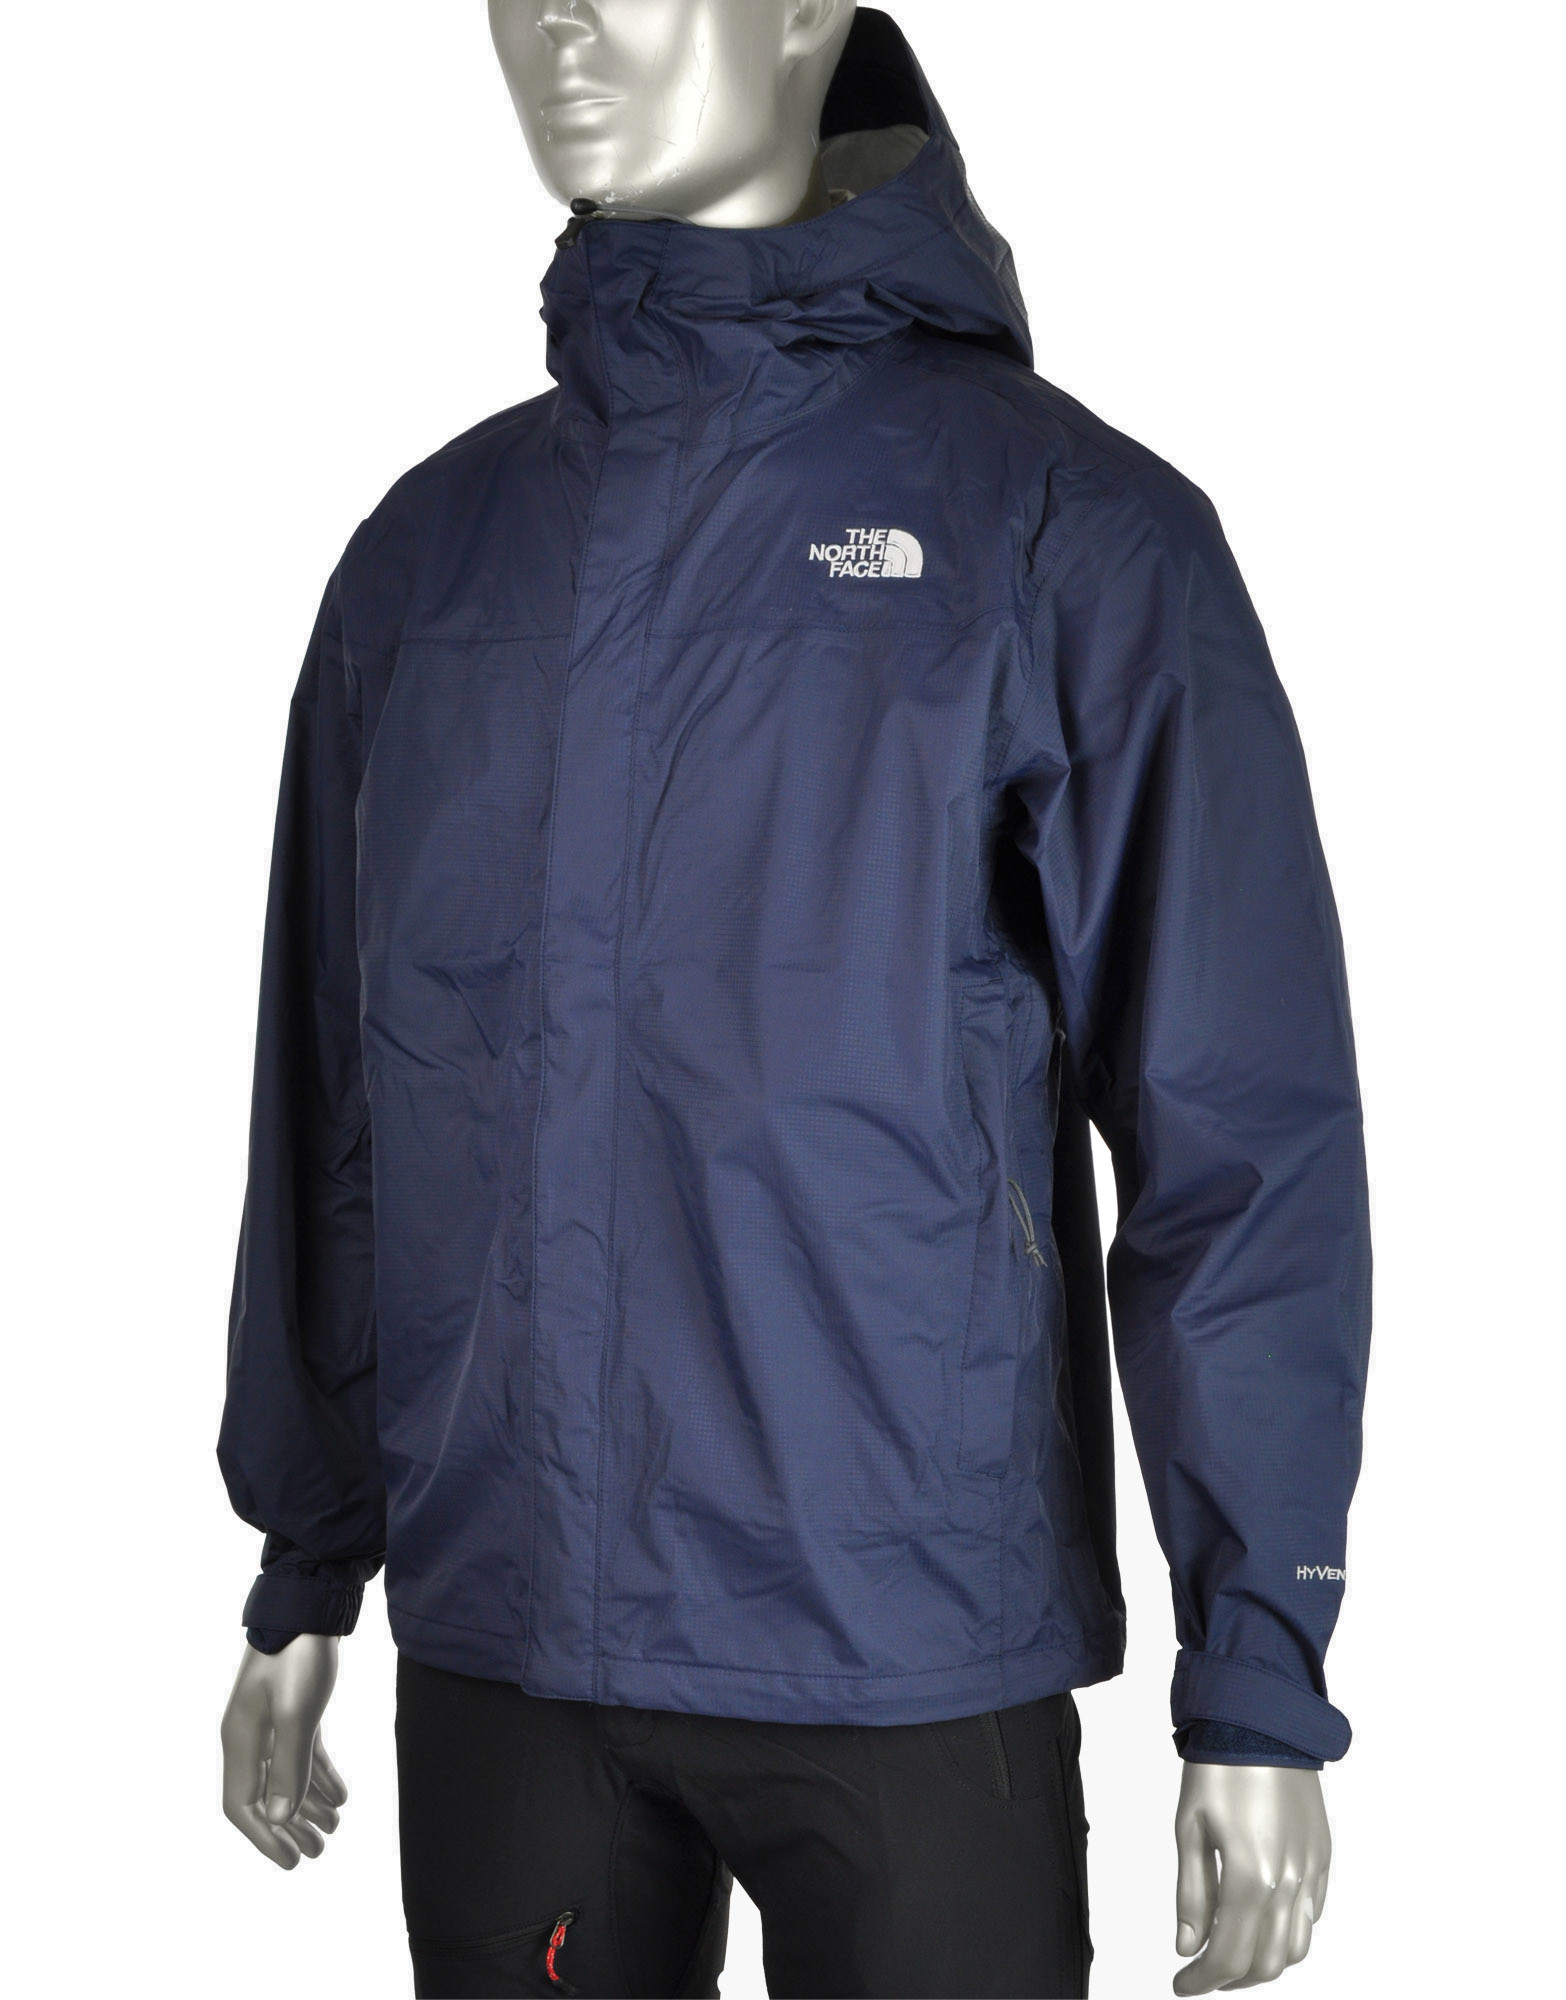 M Venture Jacket by The north face 